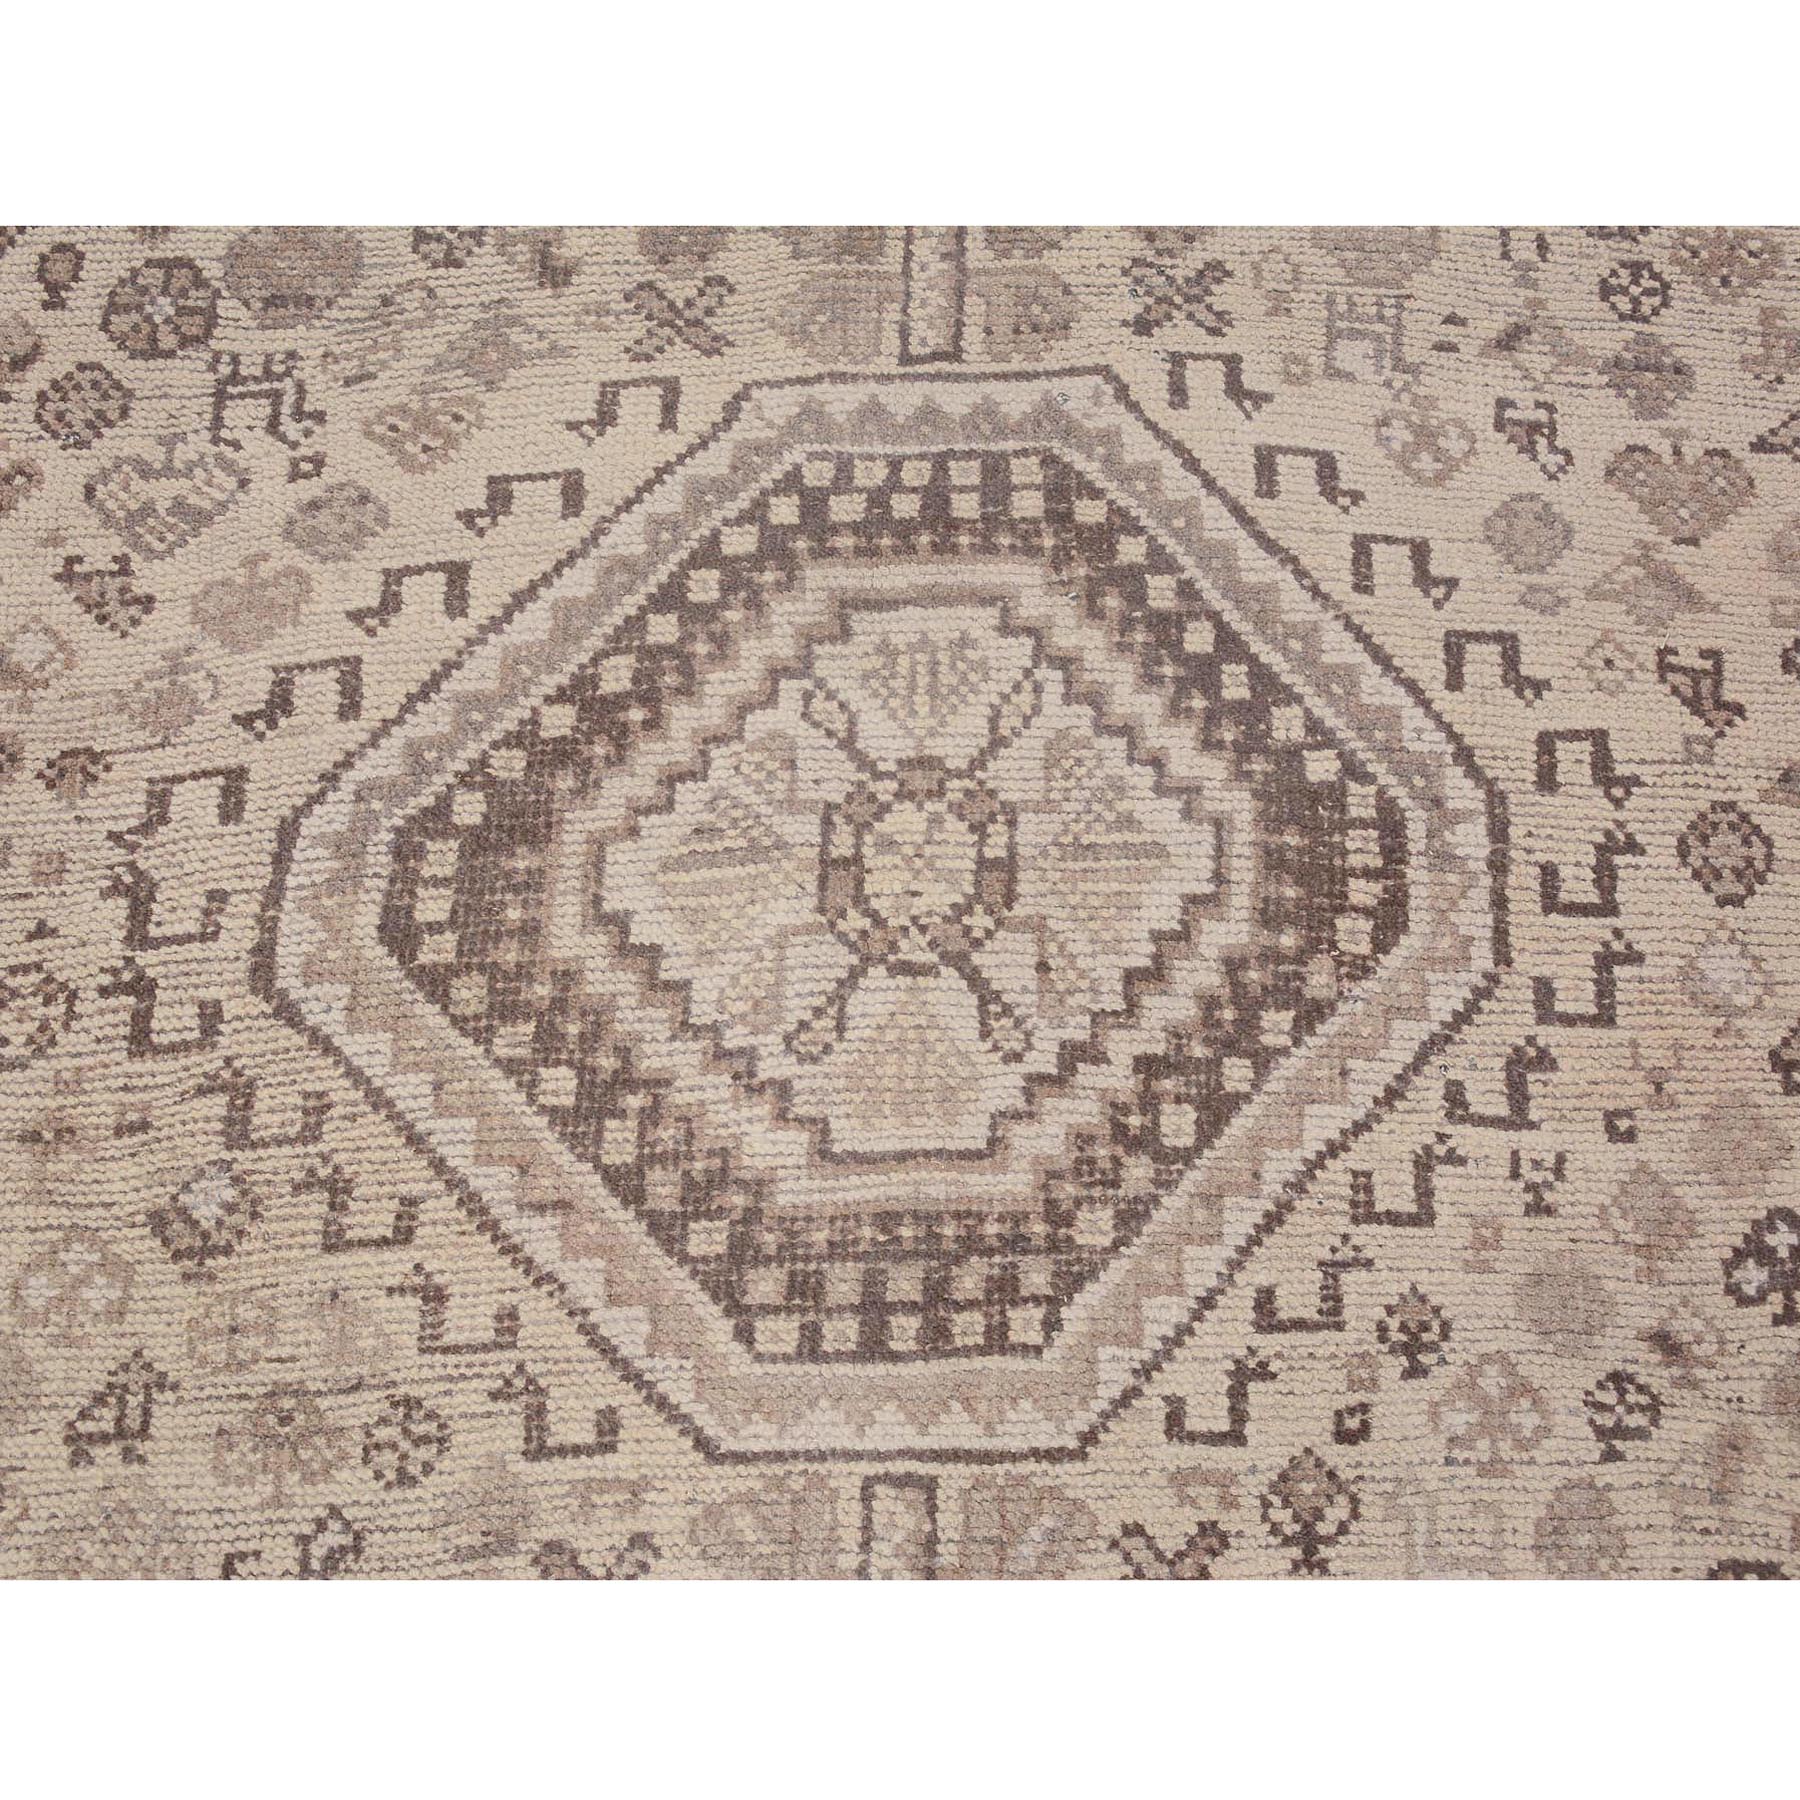 7'2"x9'5" Natural Colors Vintage And Worn Down Persian Shiraz Pure Wool Distressed Hand Woven Oriental Rug 